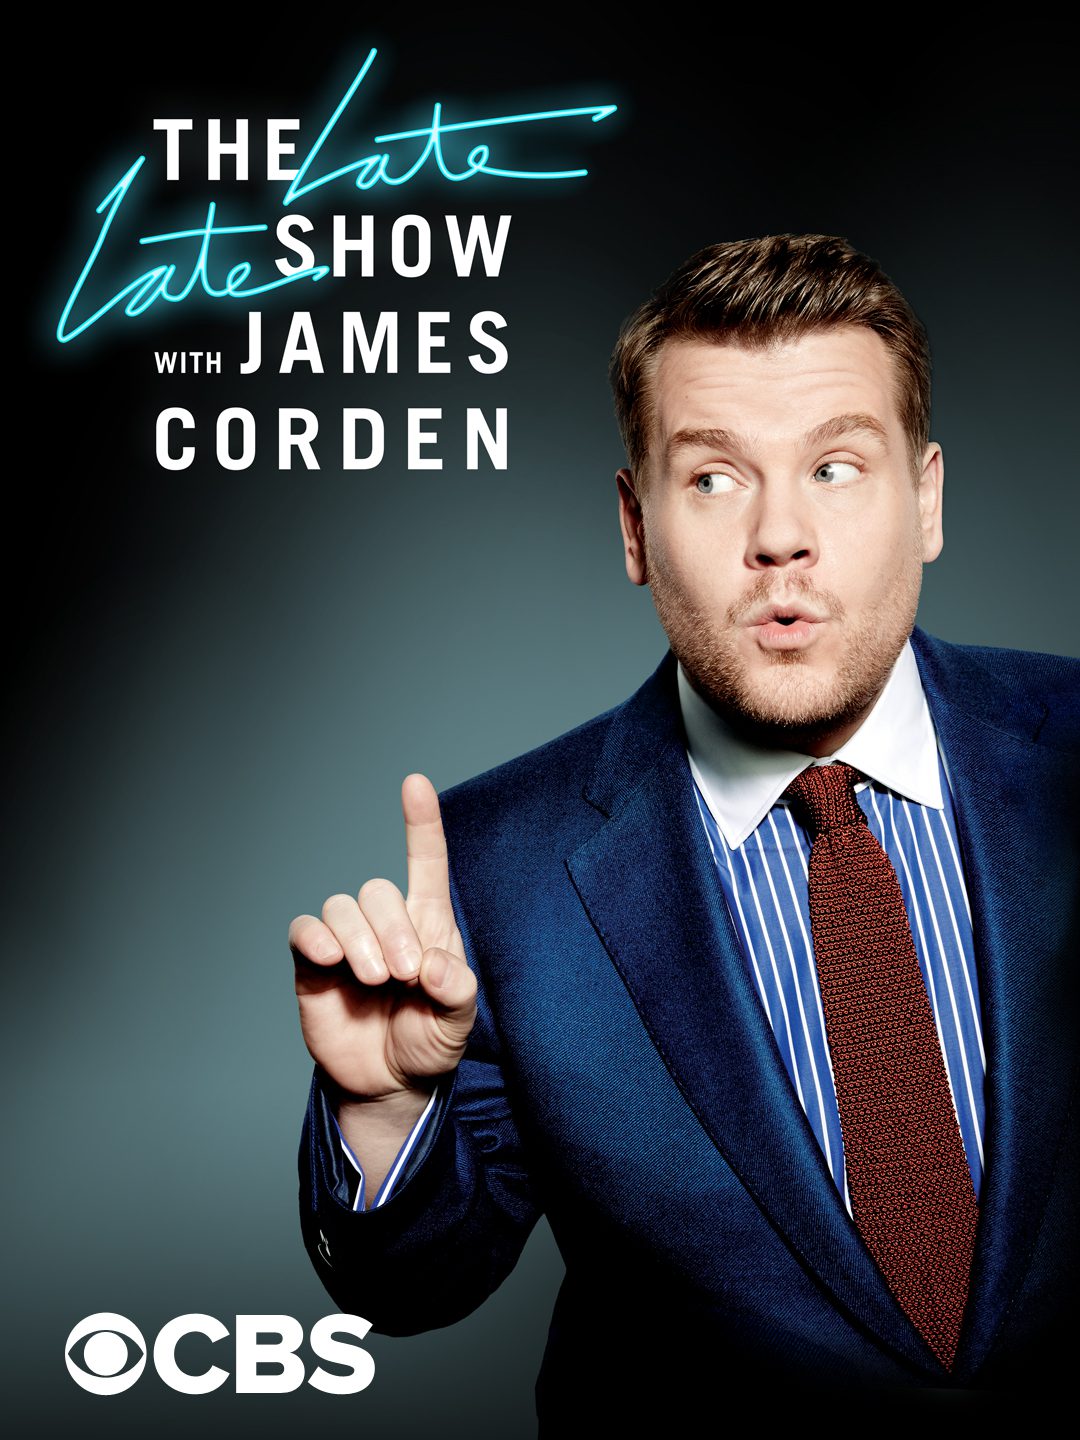 Why is James Corden leaving The Late Late Show